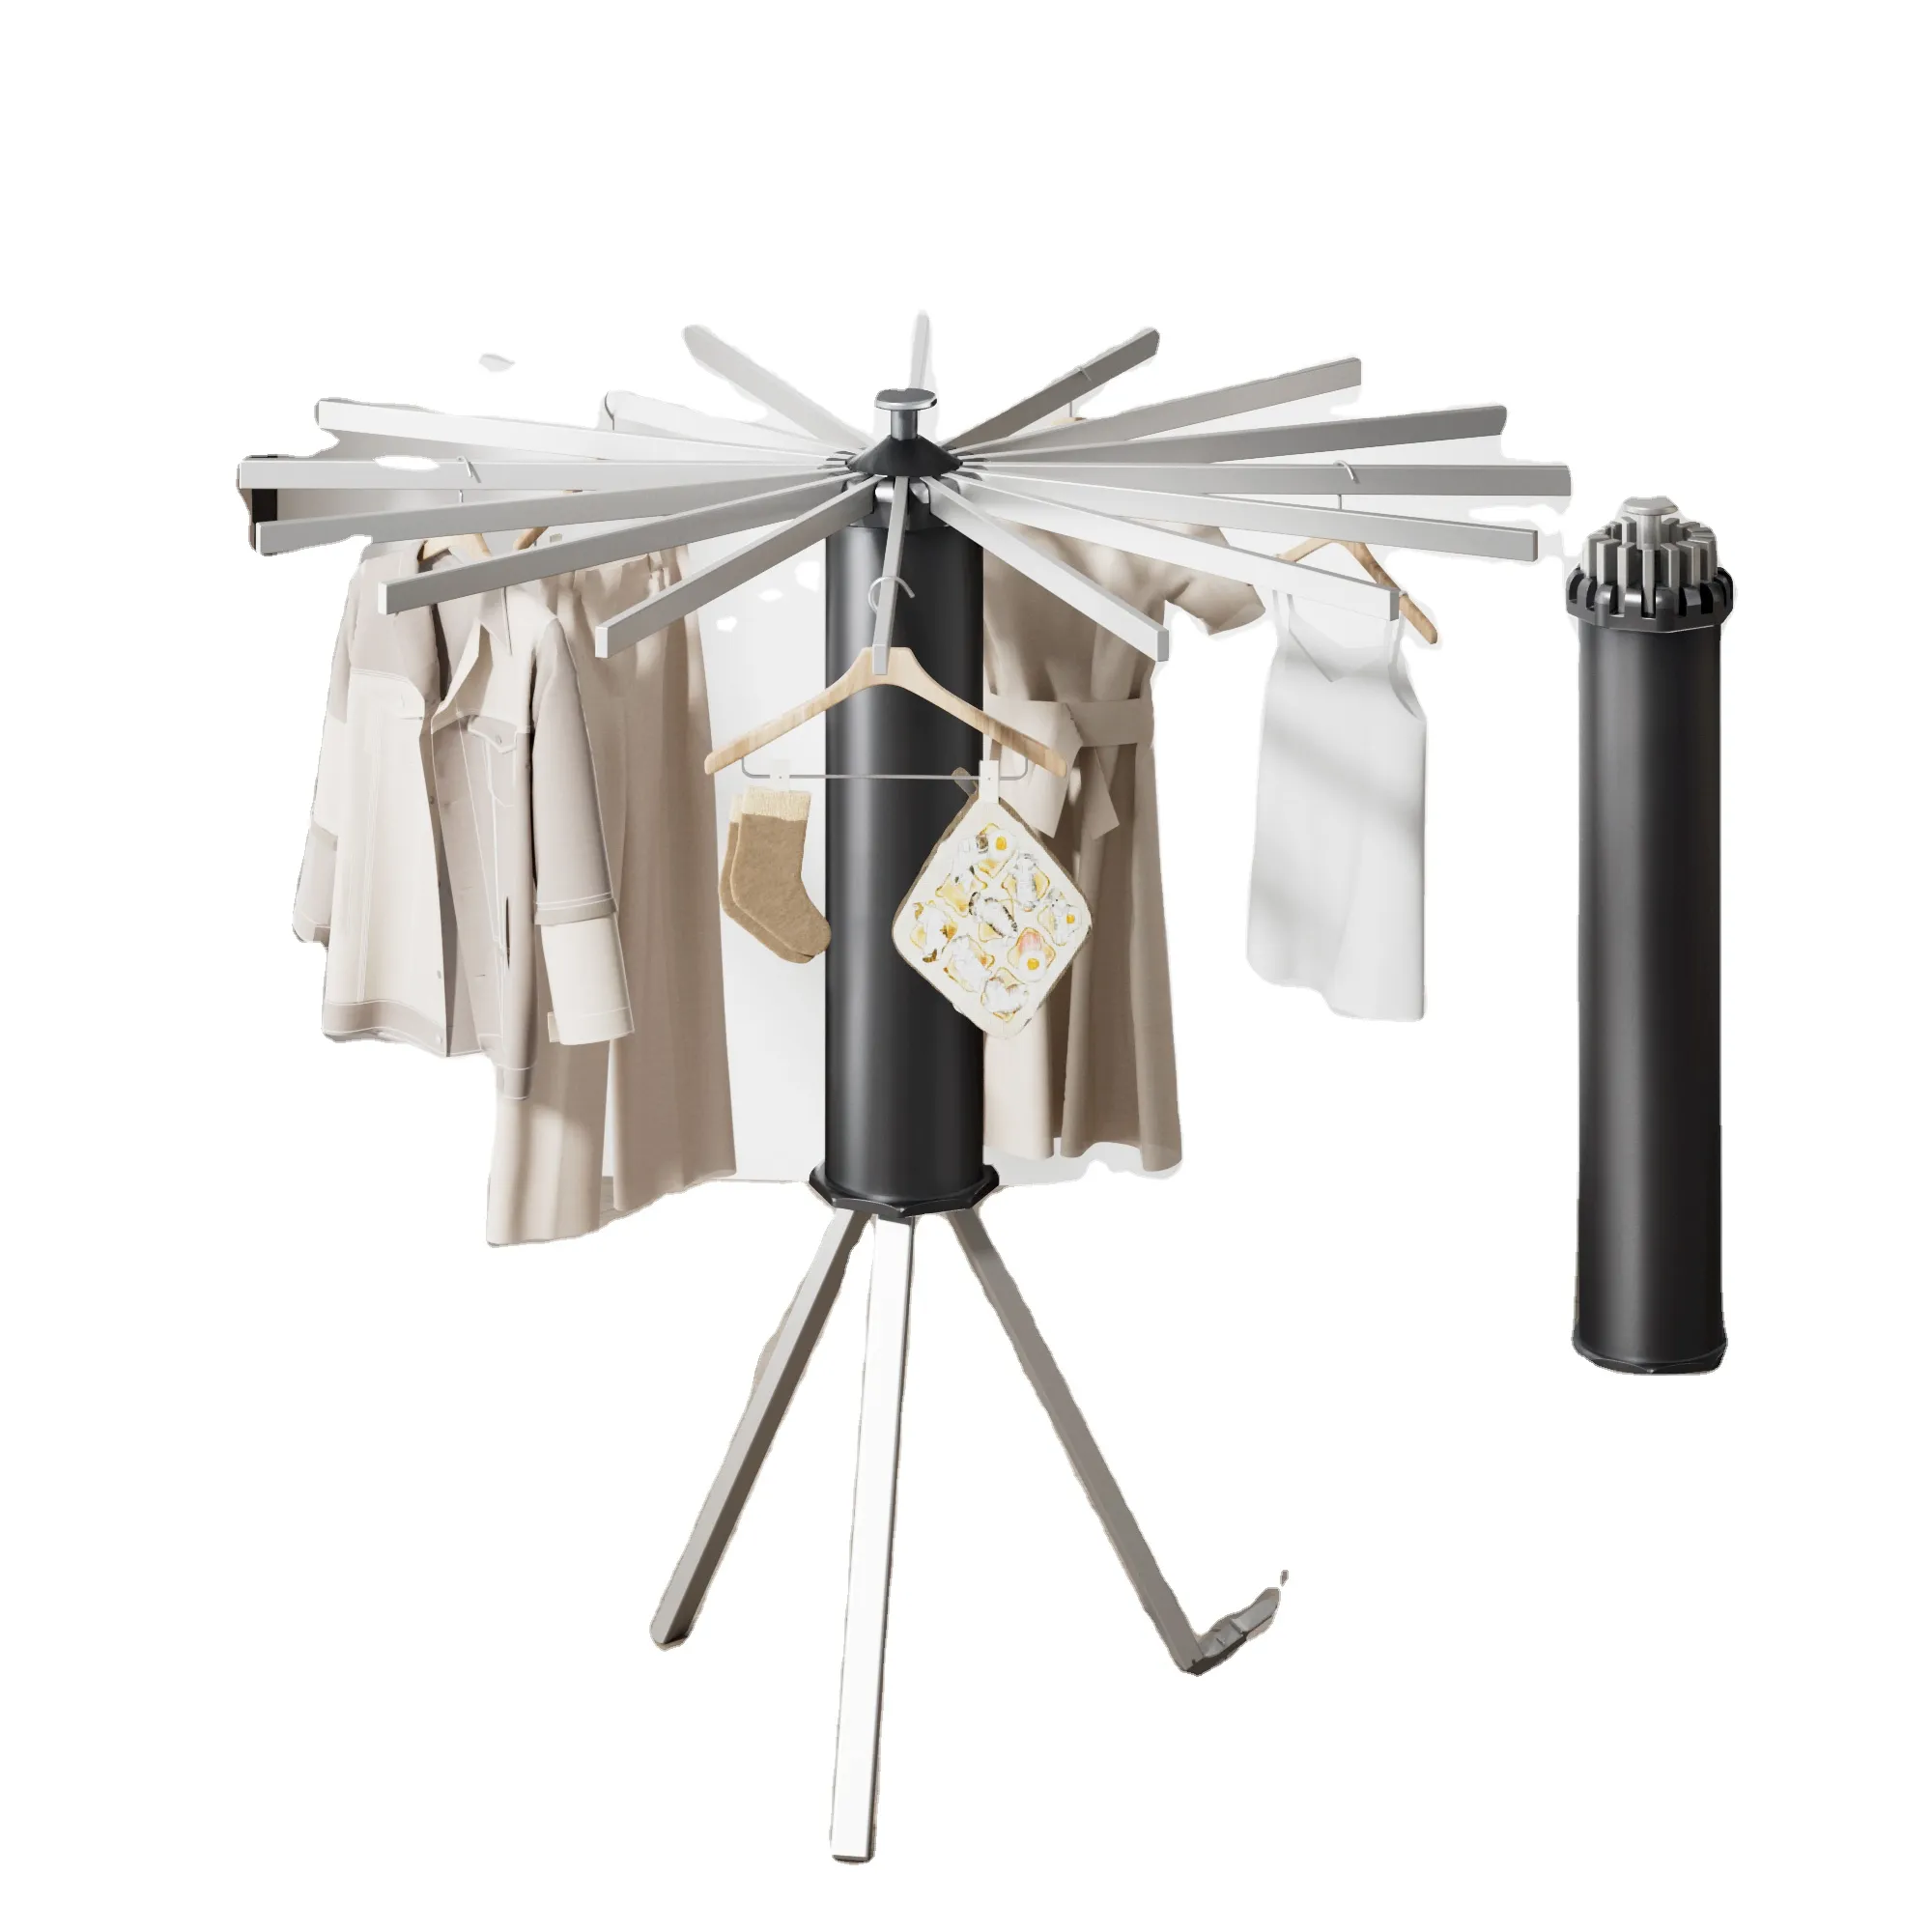 16 hangers aluminum + wood Drying Rod Tripod Clothes Drying Rack Folding Indoor Portable